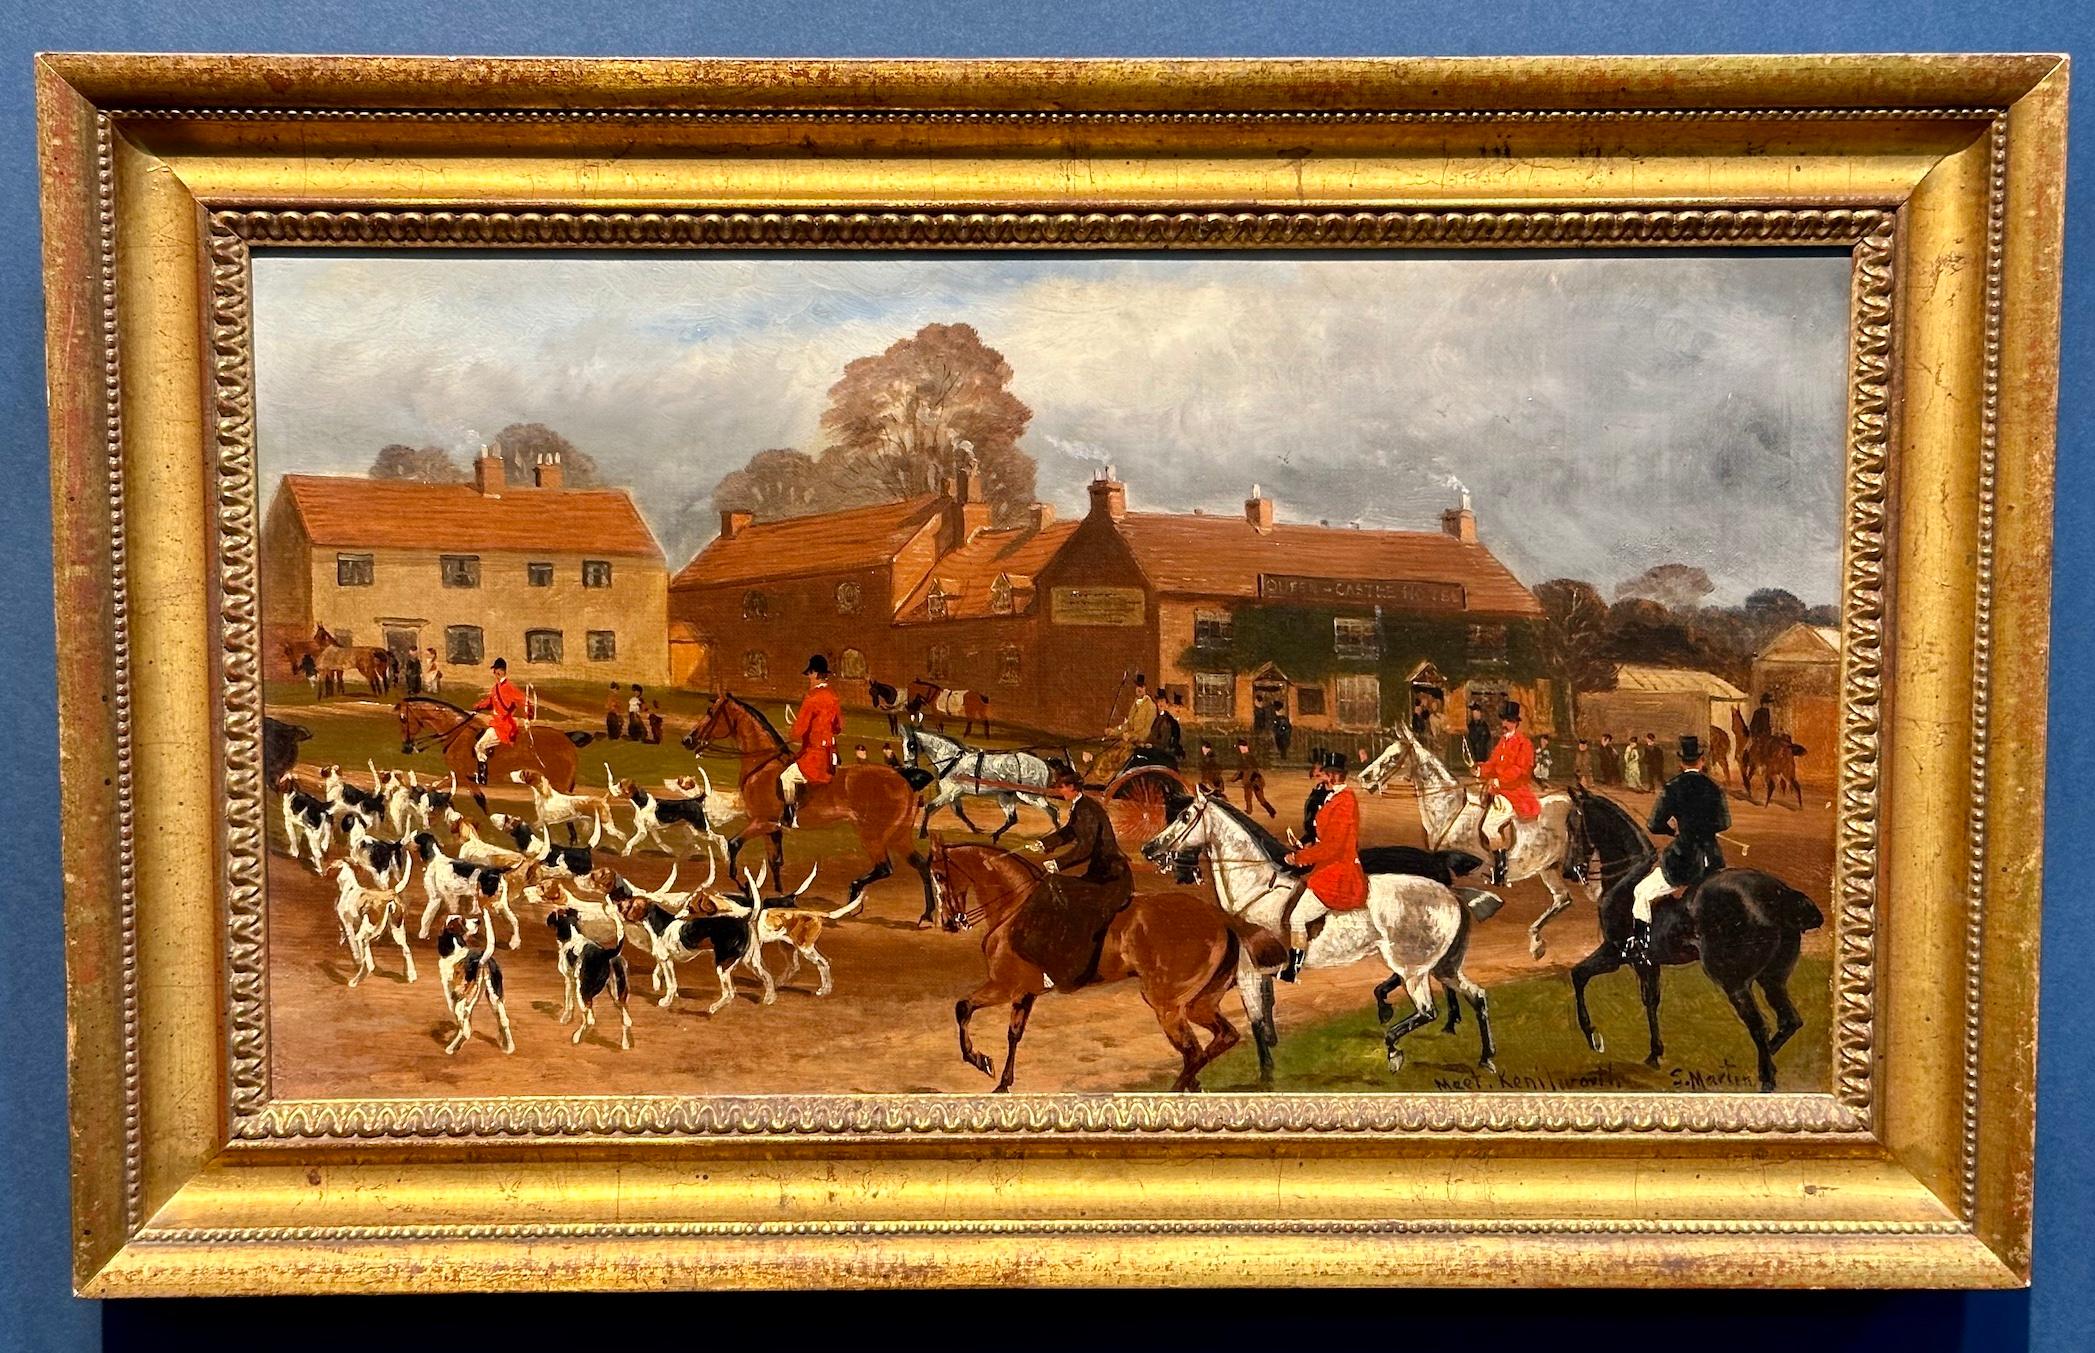 Sylvester Martin Landscape Painting - 19th century English Fox hunters with hounds on horseback in Kenilworth